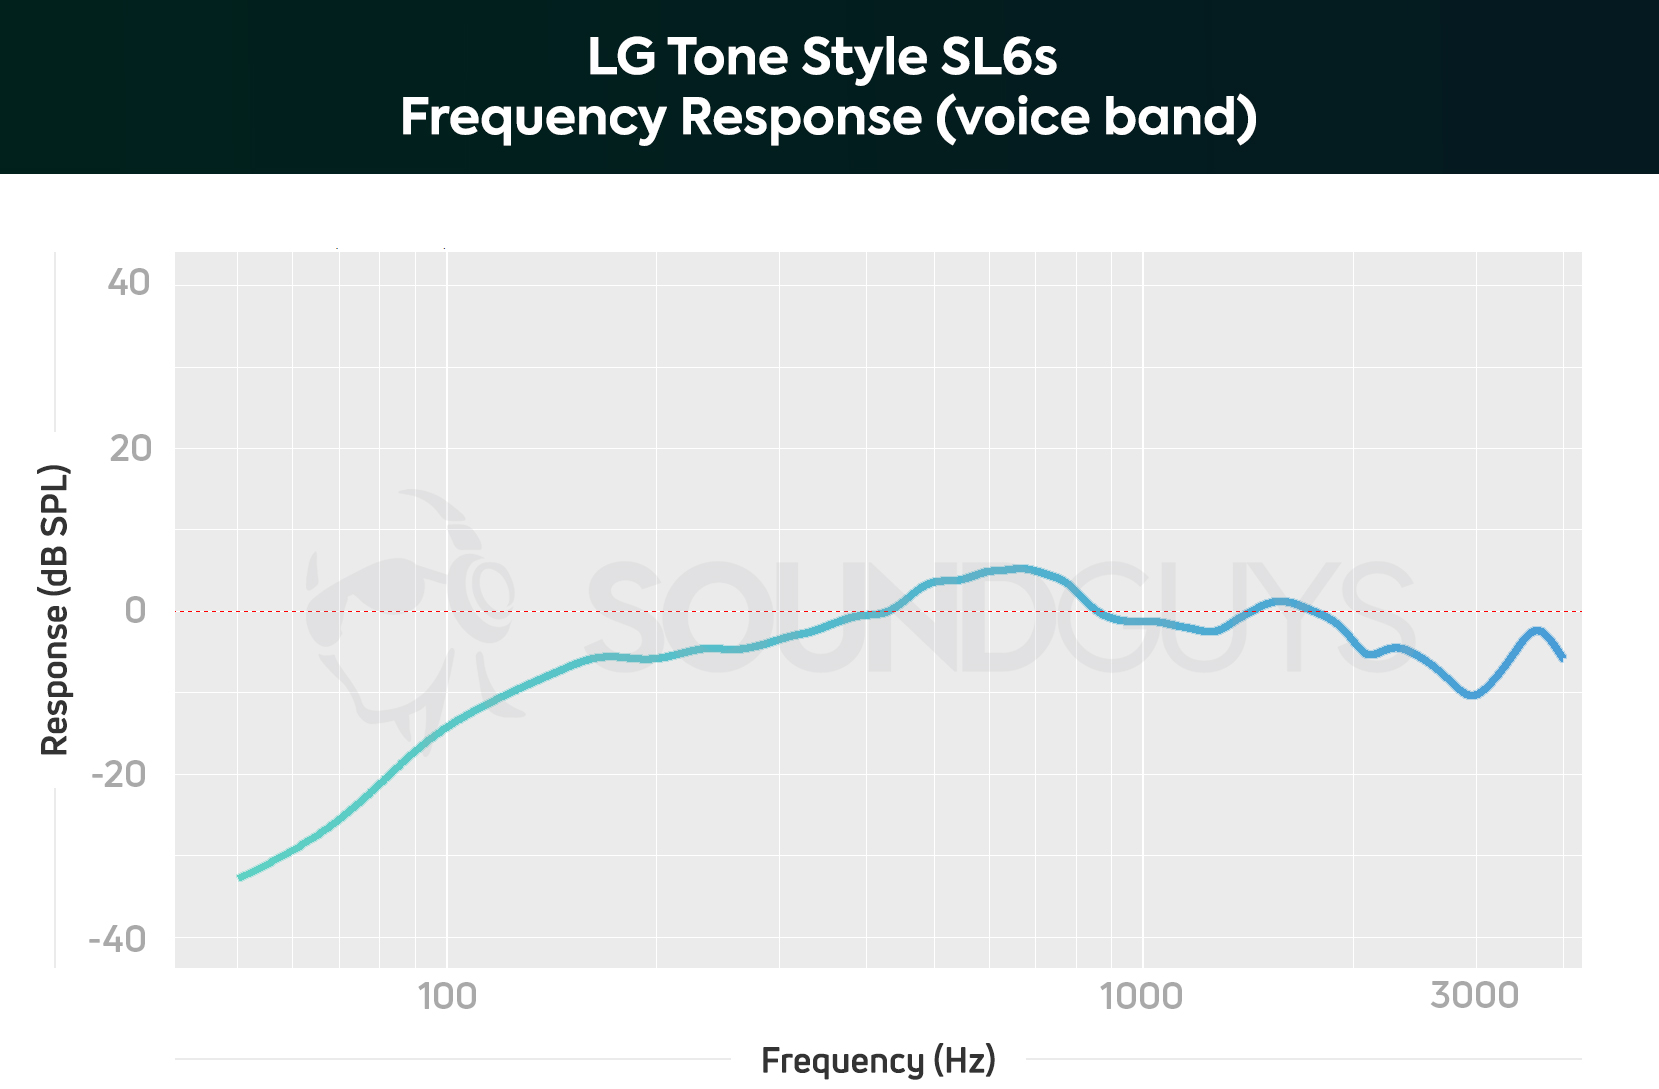 LG Tone Style SL6s frequency response chart limited to the human voice band.